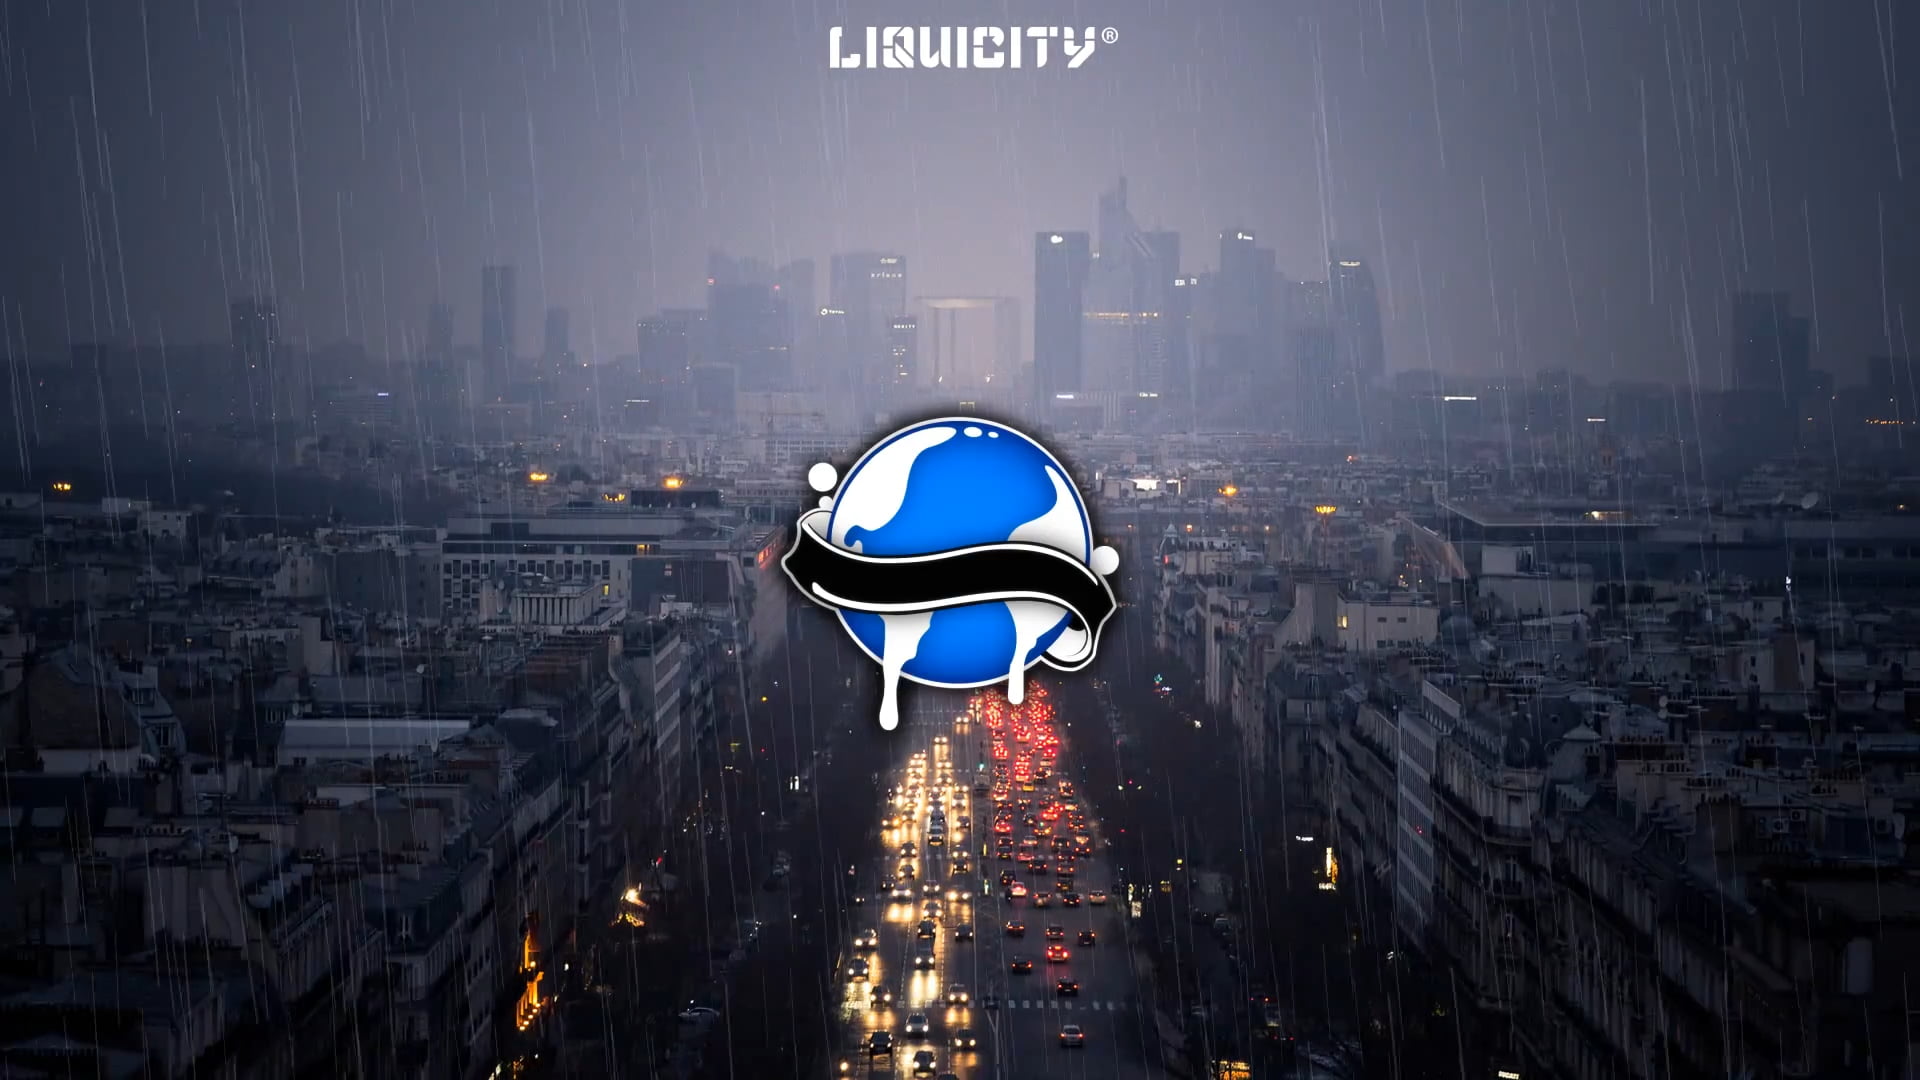 blue and white plastic toy, Liquicity